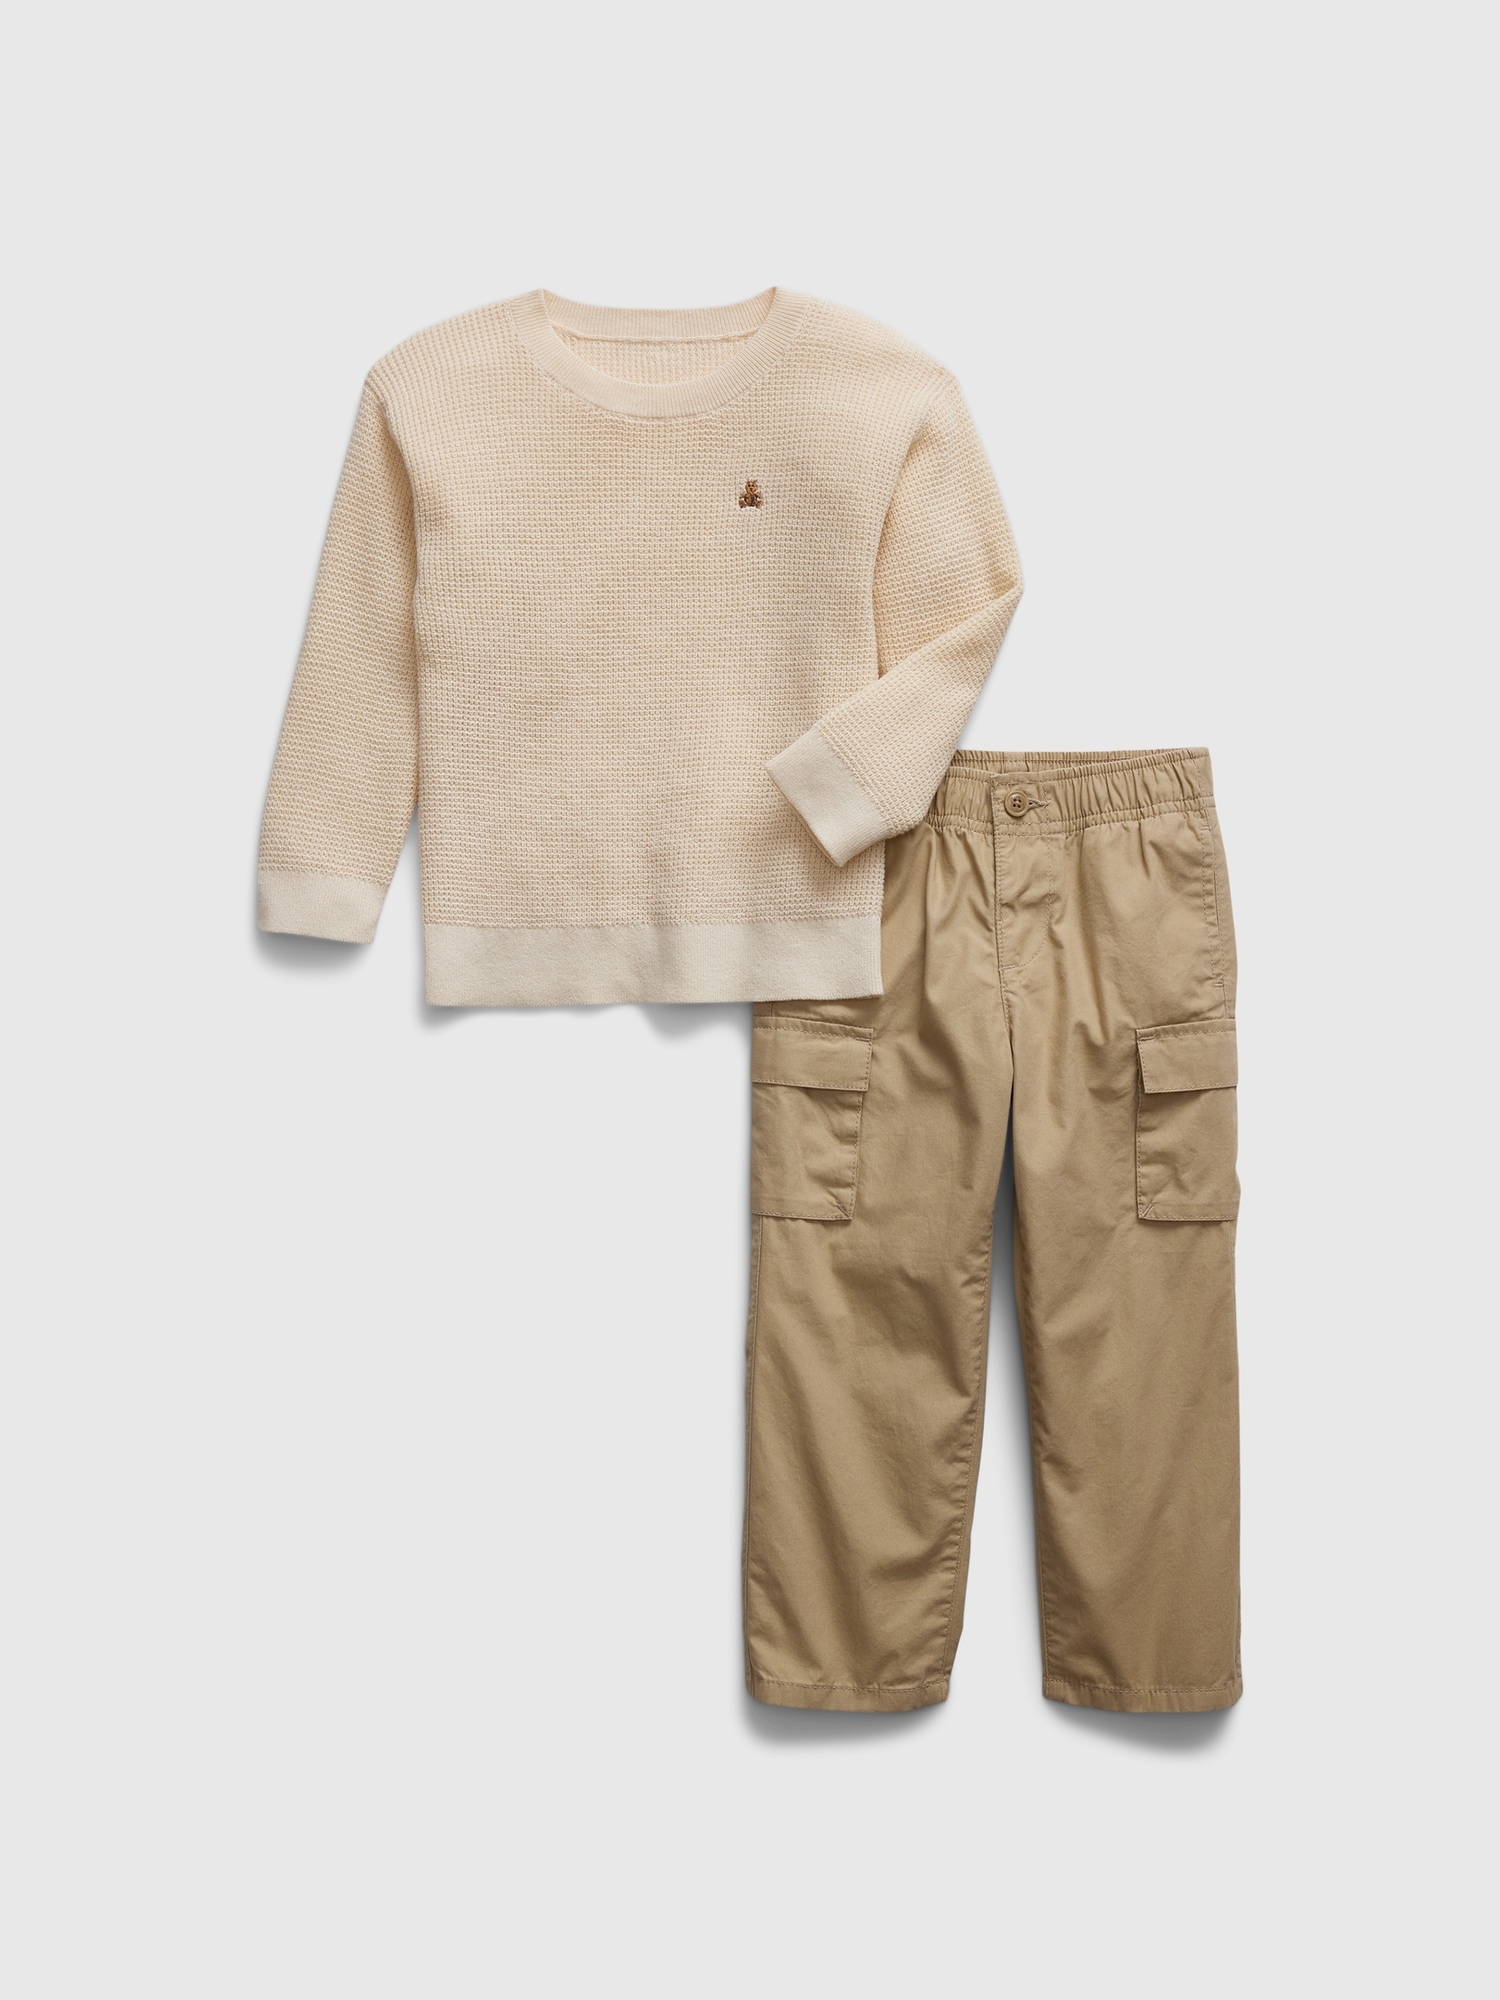 Toddler Two-Piece Outfit Set